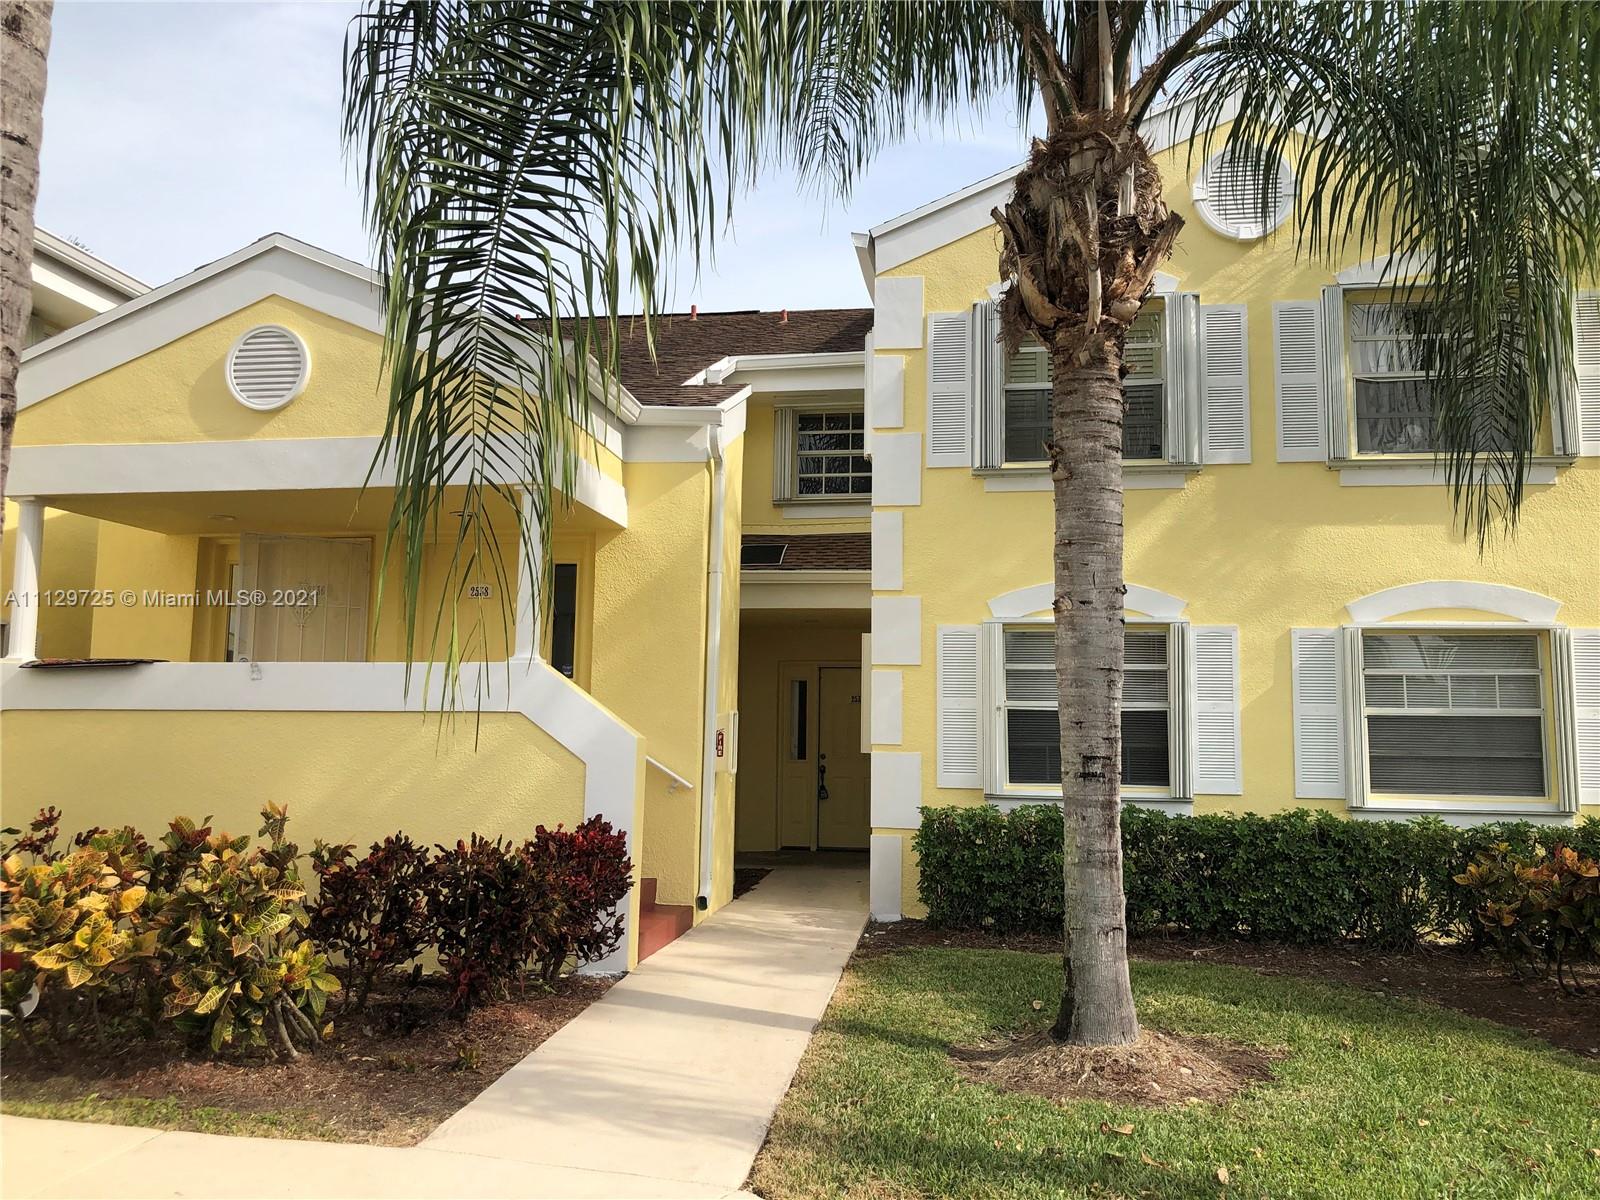 LOVELY UPDATED FIRST FLOOR CONDO IN HIGHLY DESIRABLE KEYS GATE COMMUNITY. RENOVATED A LITTLE OVER A YEAR AGO WITH NEW KITCHEN, STAINLESS STEELE APPLIANCES, UPDATED BATHROOMS, LAMINATE FLOORS IN BEDROOMS & NO MORE POPCORN CEILINGS!! OFFERS SCREENED PATIO & ACCORDIAN SHUTTERS.  ONE MONTHLY HOA PAYMENT COVERS WATER, SEWER, ATT UVERSE CABLE & WIFI W/ FIBEROPTIC, INSURANCE, SECURITY & CLUBHOUSE ACCESS.